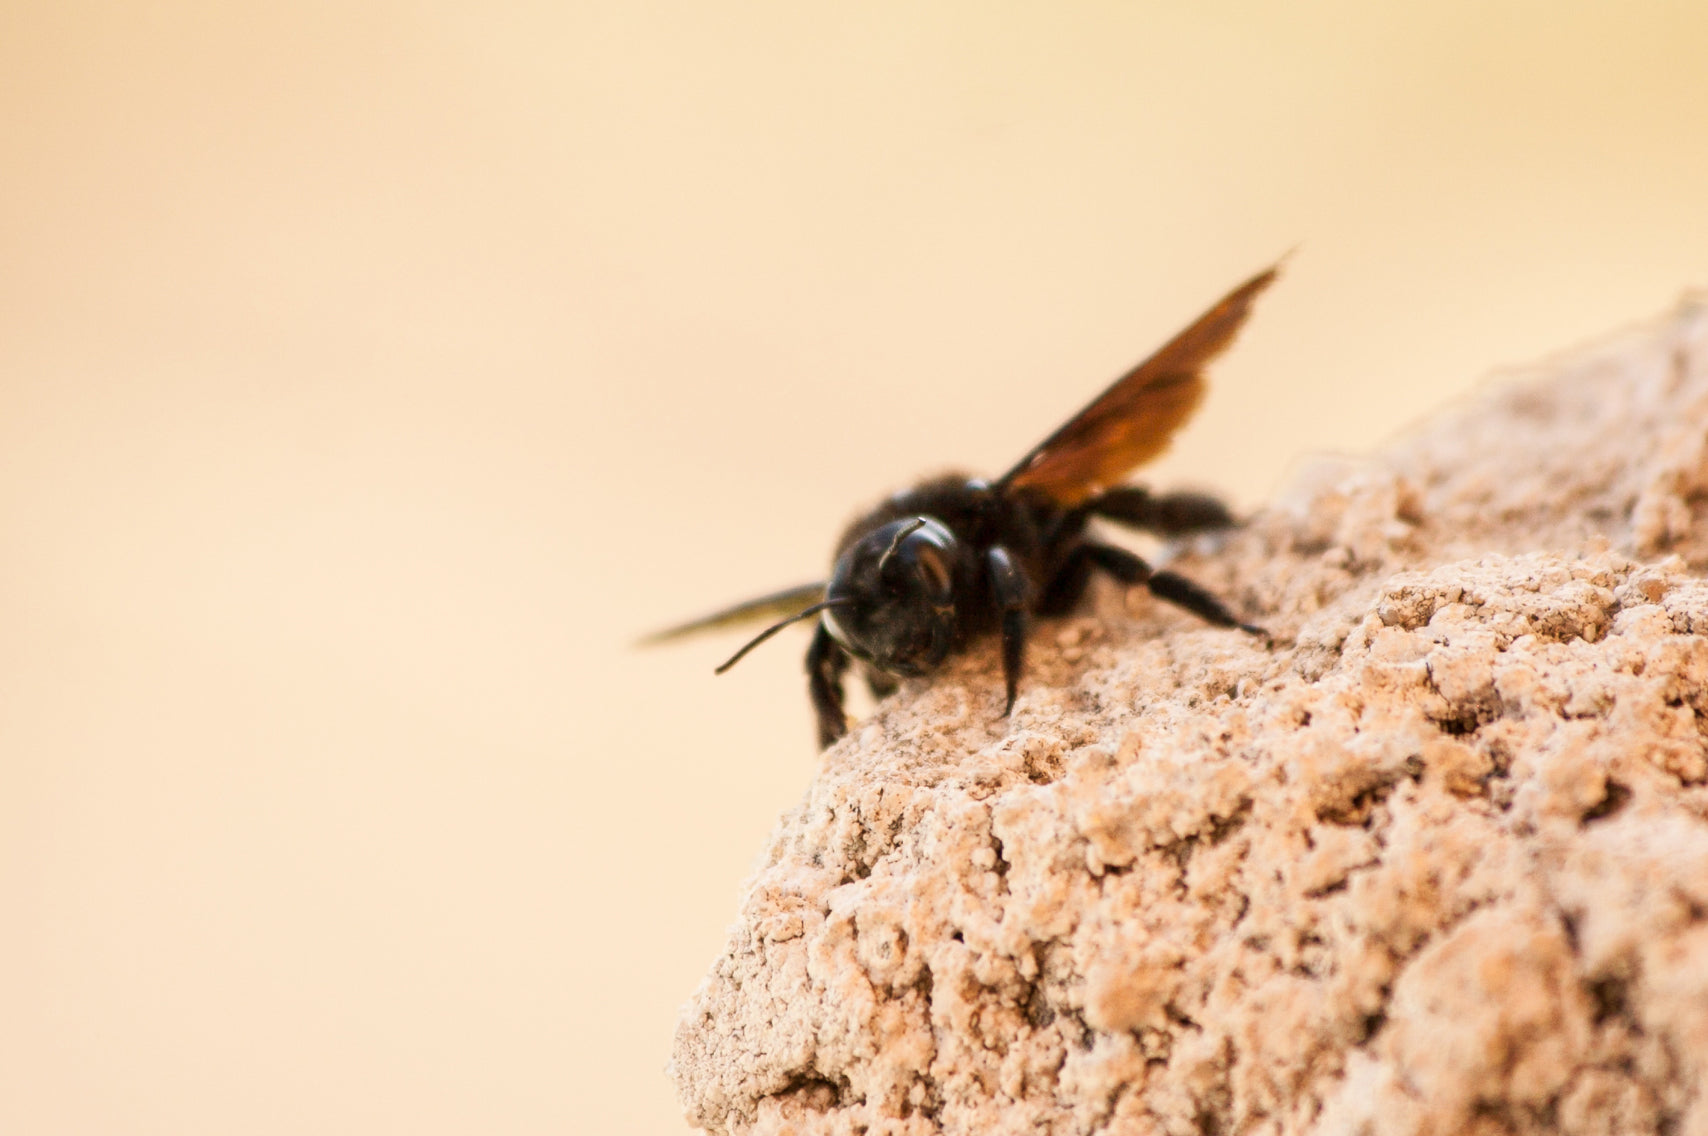 What happens to carpenter bees at night?